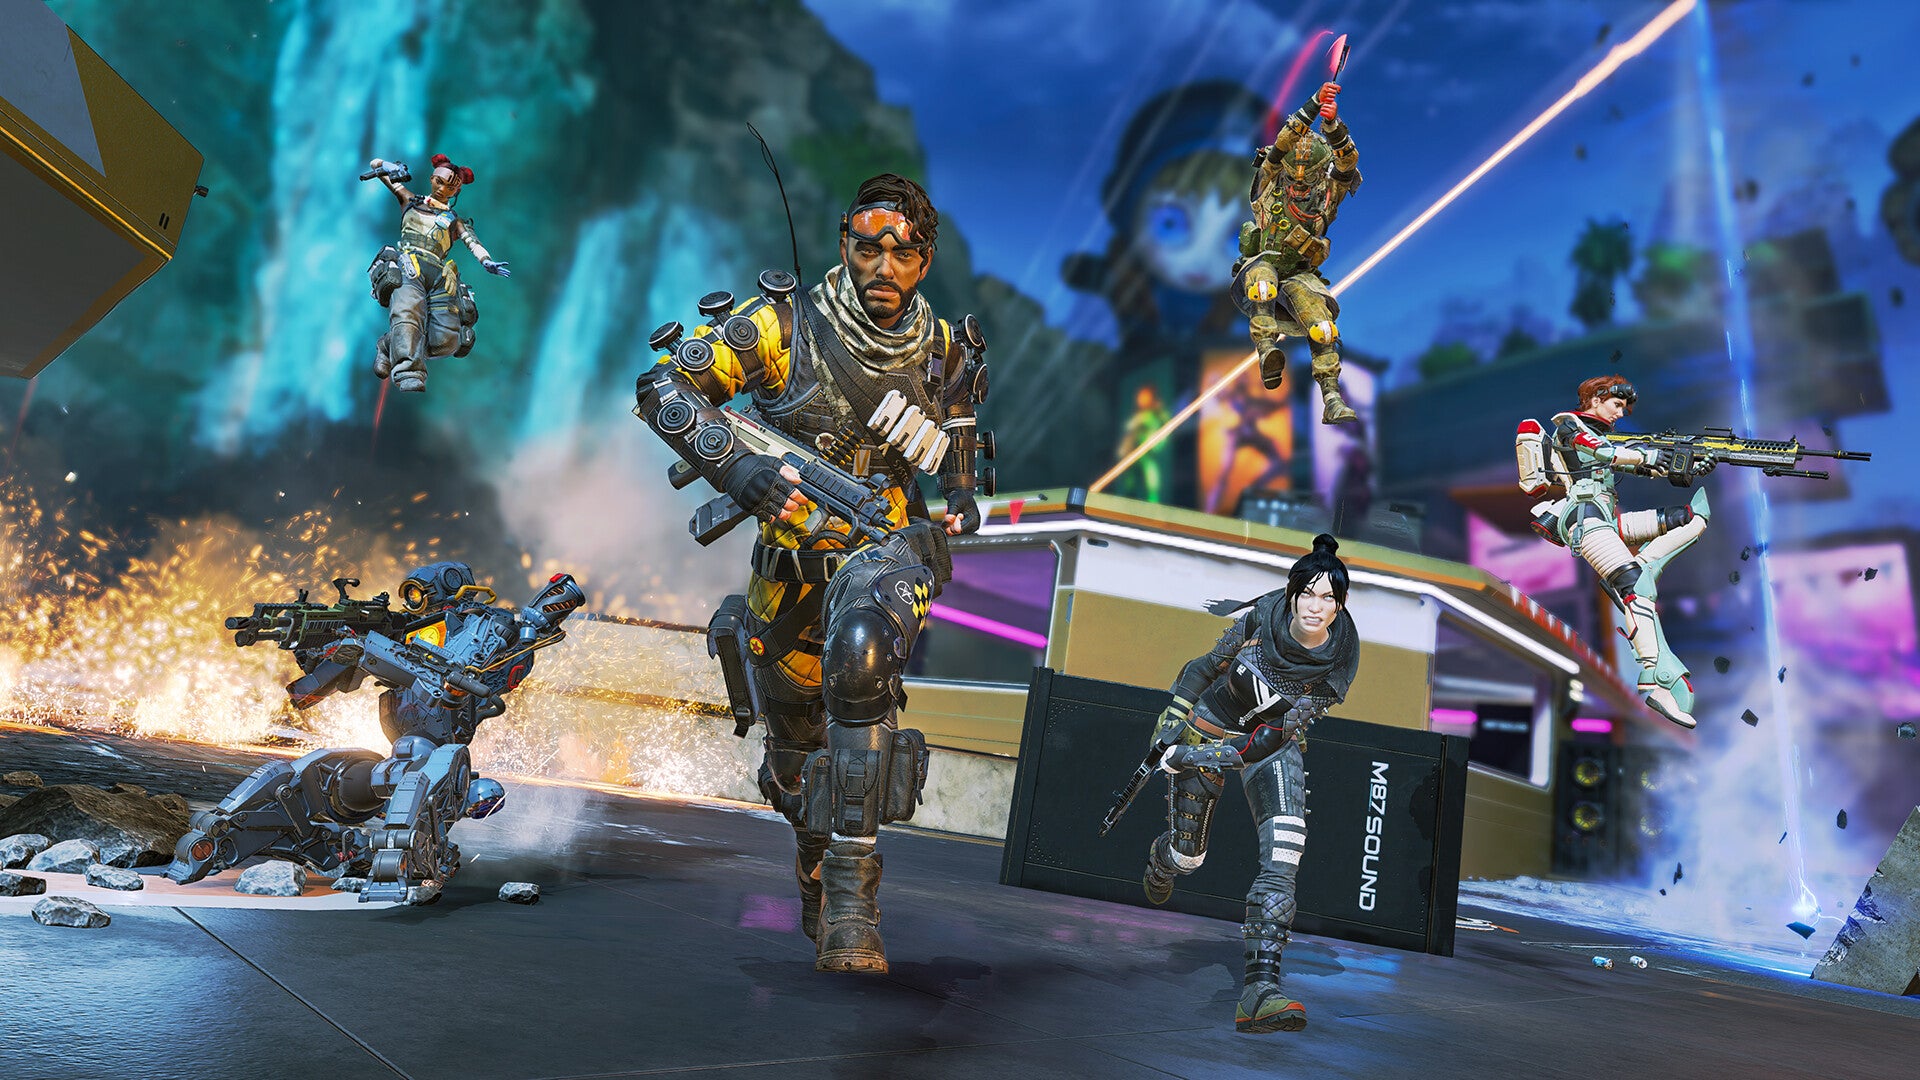 Apex Legends cross-progression isn't coming until 2022 for several